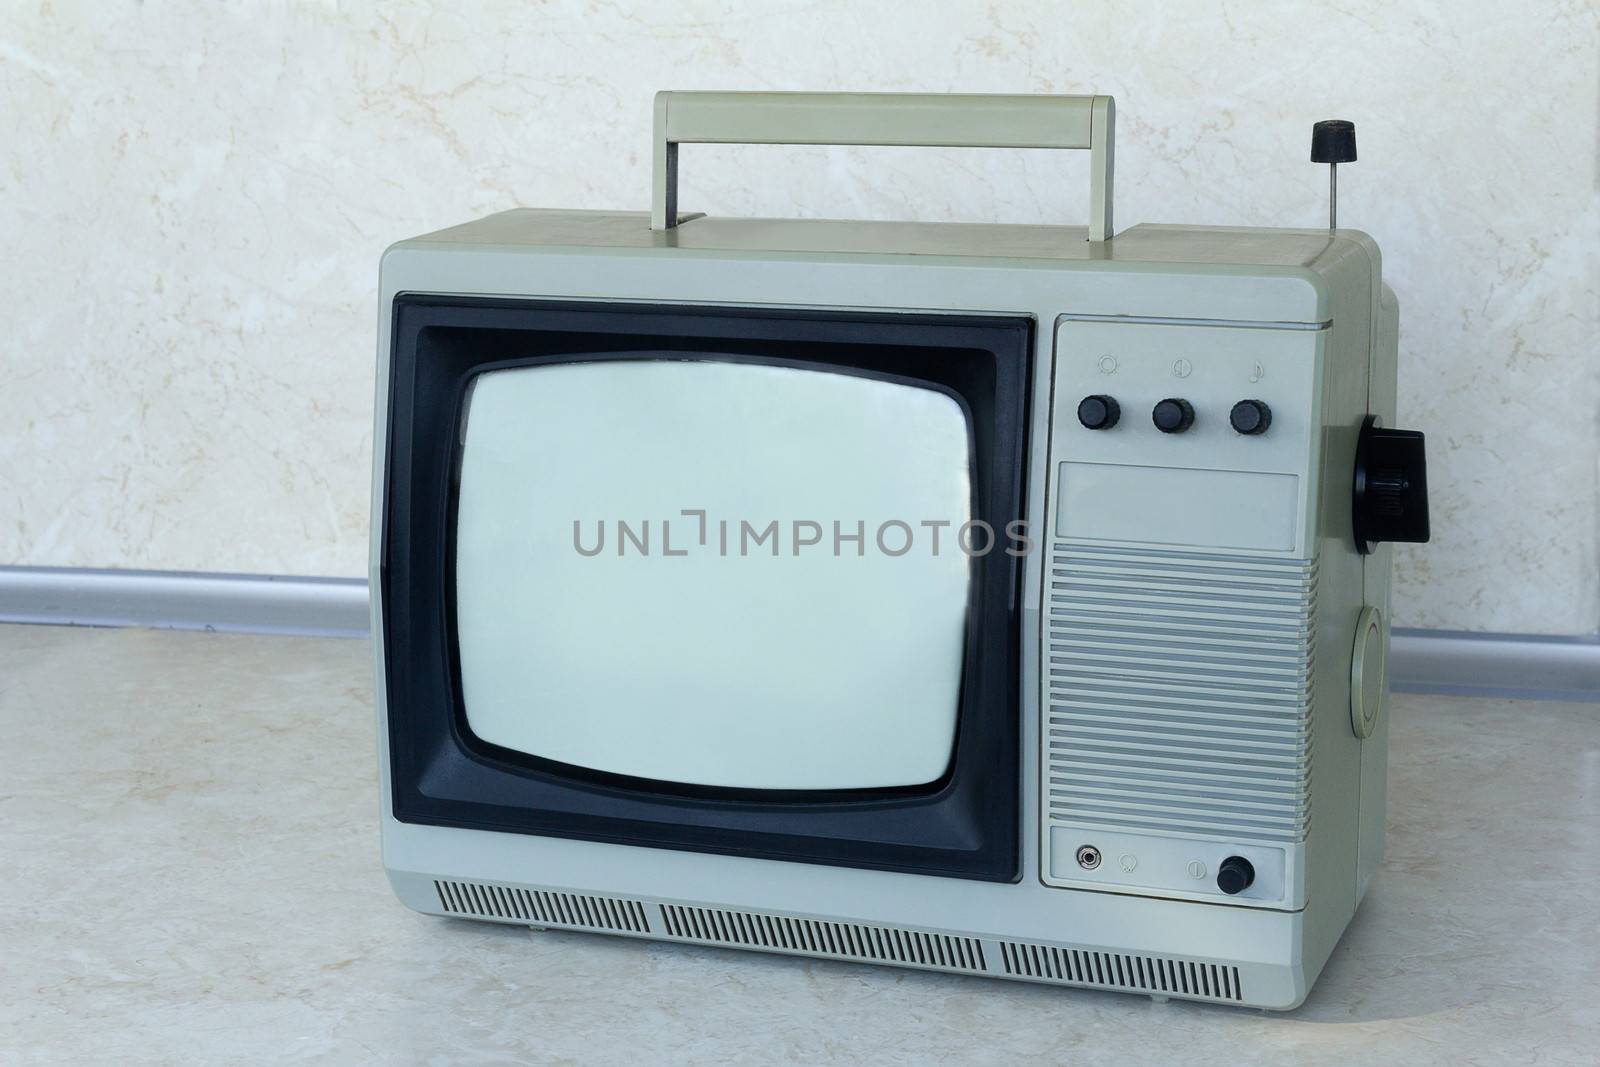 A small portable compact TV gray, an obsolete model �������������������������� about thirty years ago

g